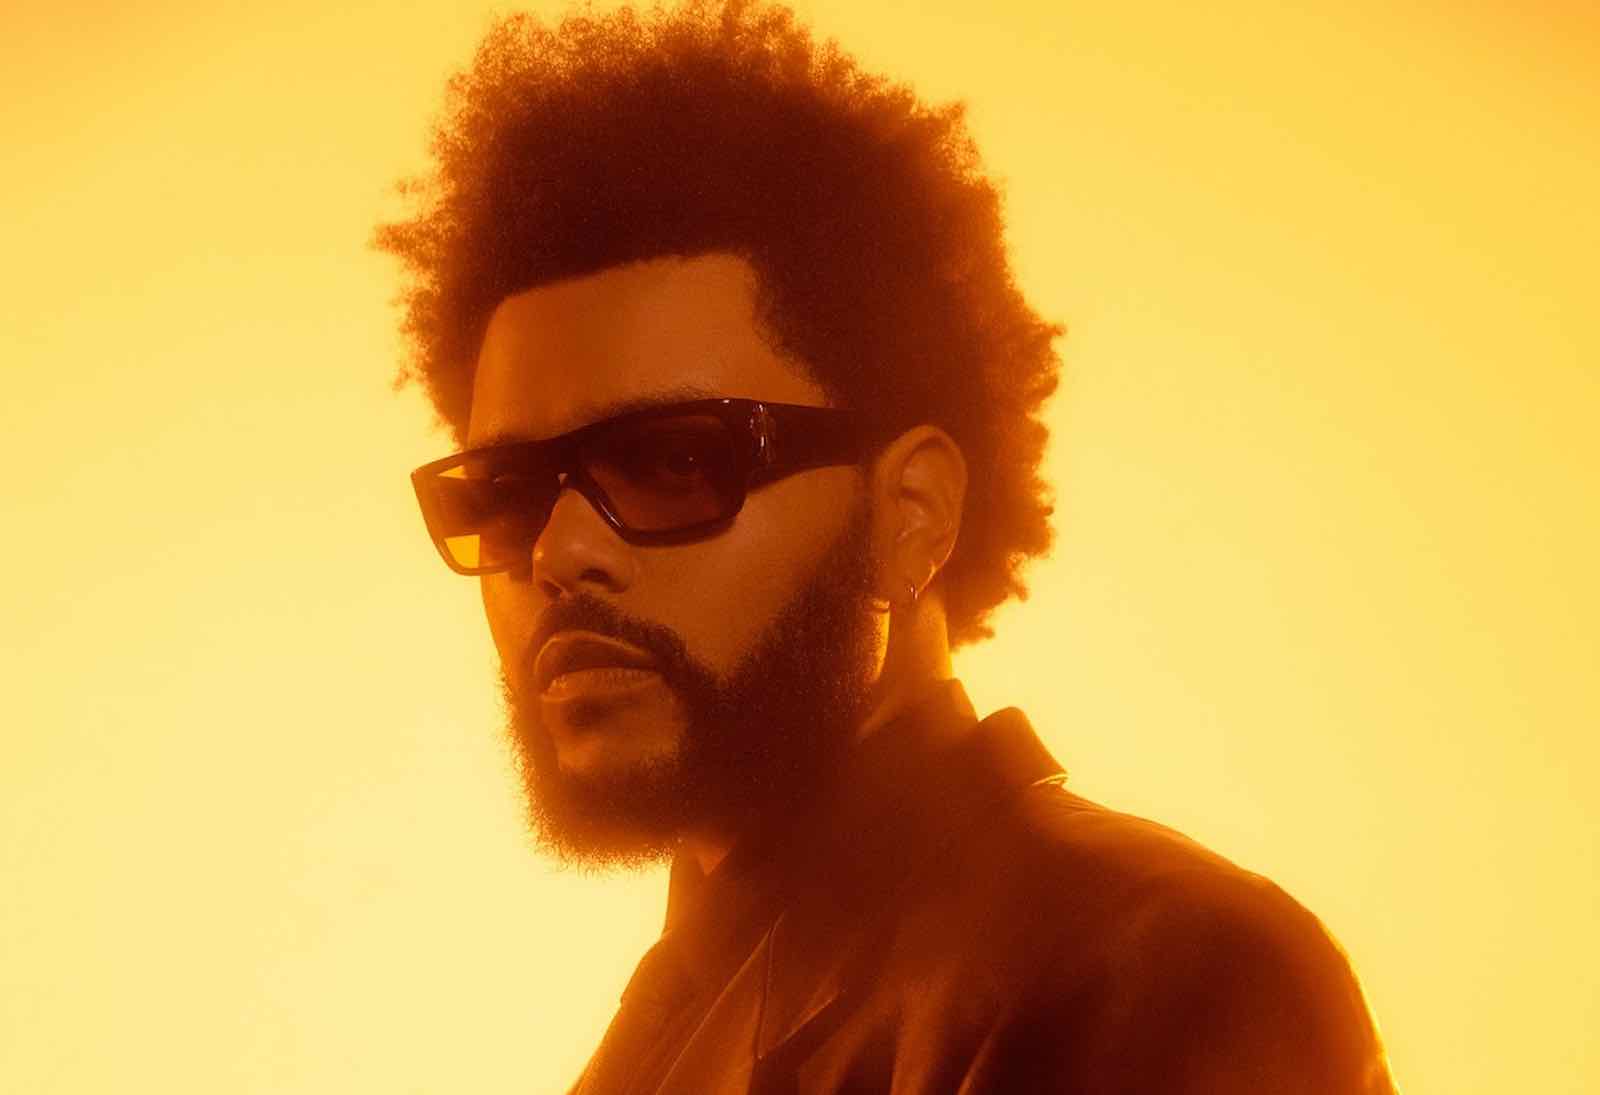 At the end of the day, the verdict on The Weeknd's acting debut is still out. Let's see how that lack of experience plays into his net worth!